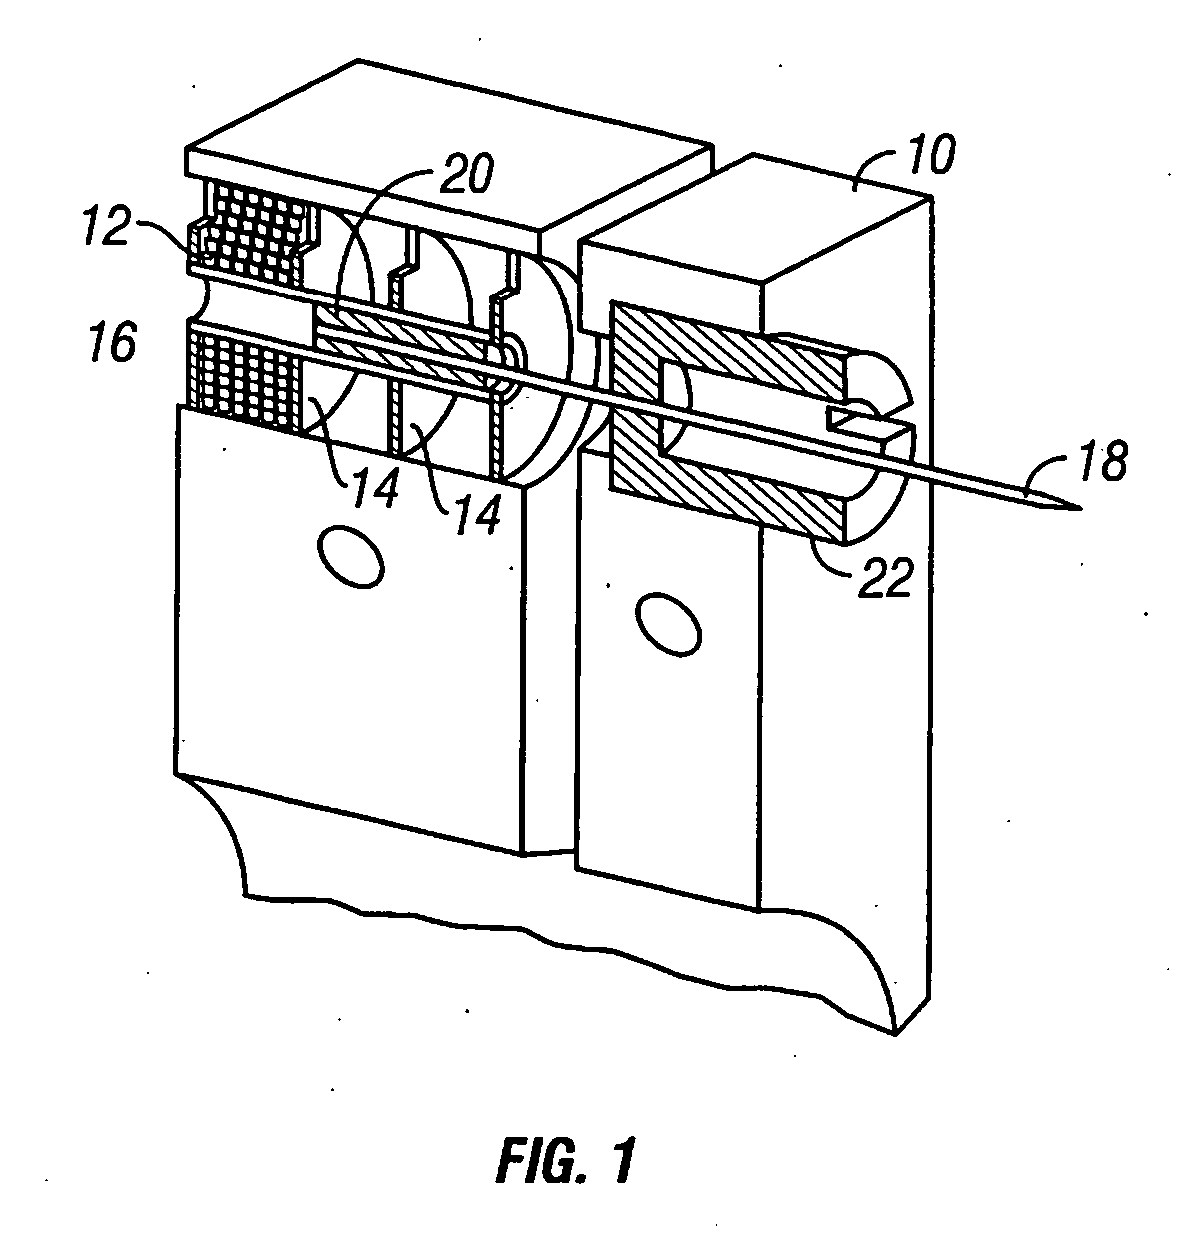 Method and apparatus for storing an analyte sampling and measurement device